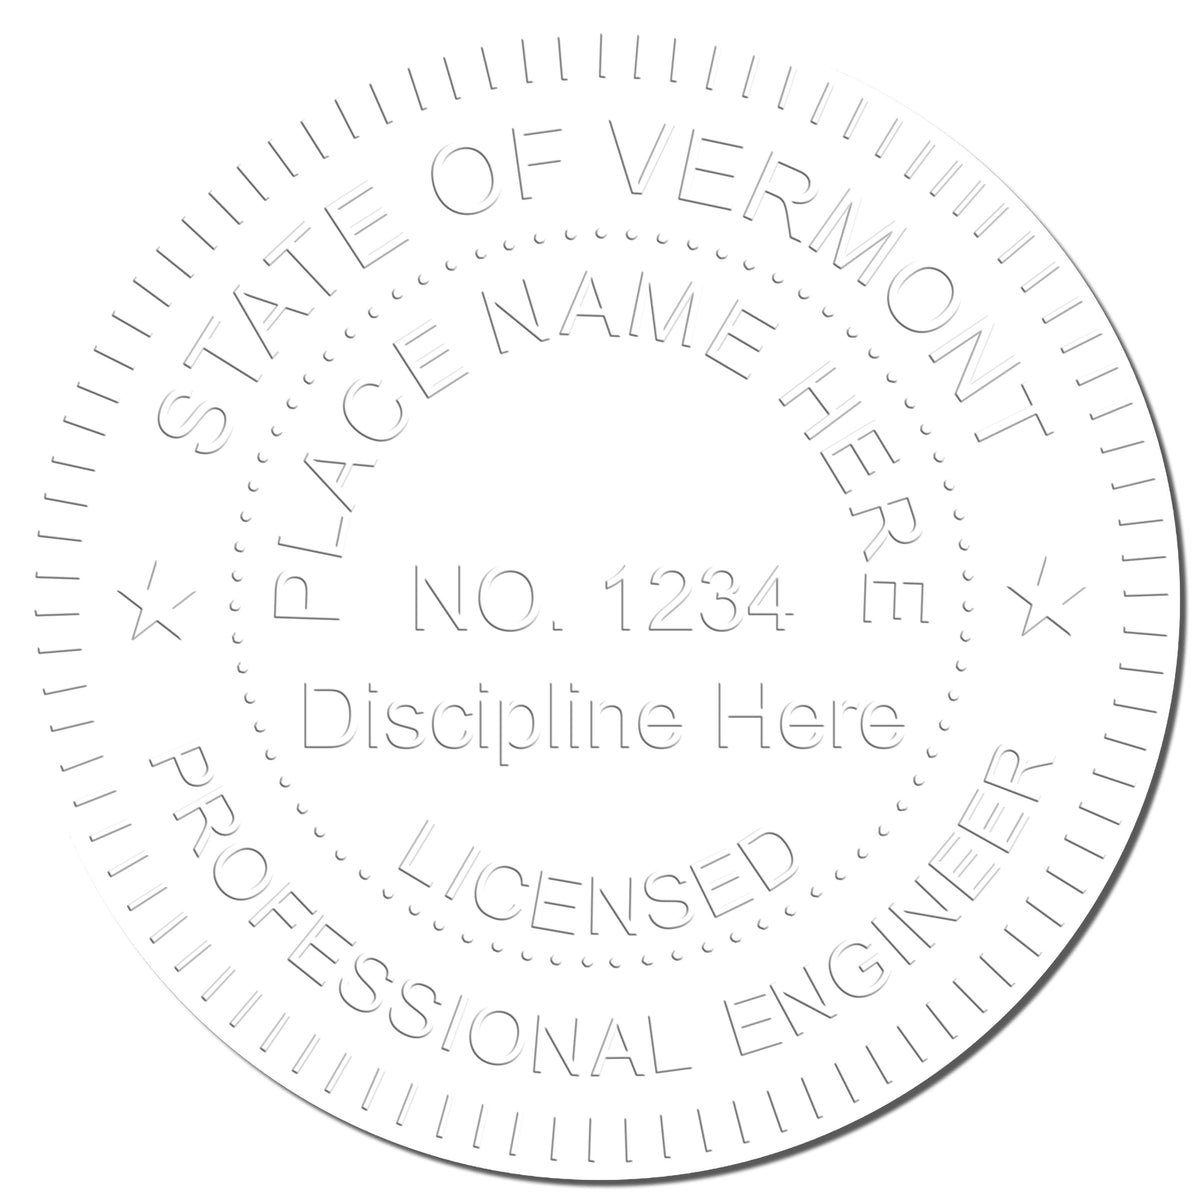 This paper is stamped with a sample imprint of the Heavy Duty Cast Iron Vermont Engineer Seal Embosser, signifying its quality and reliability.